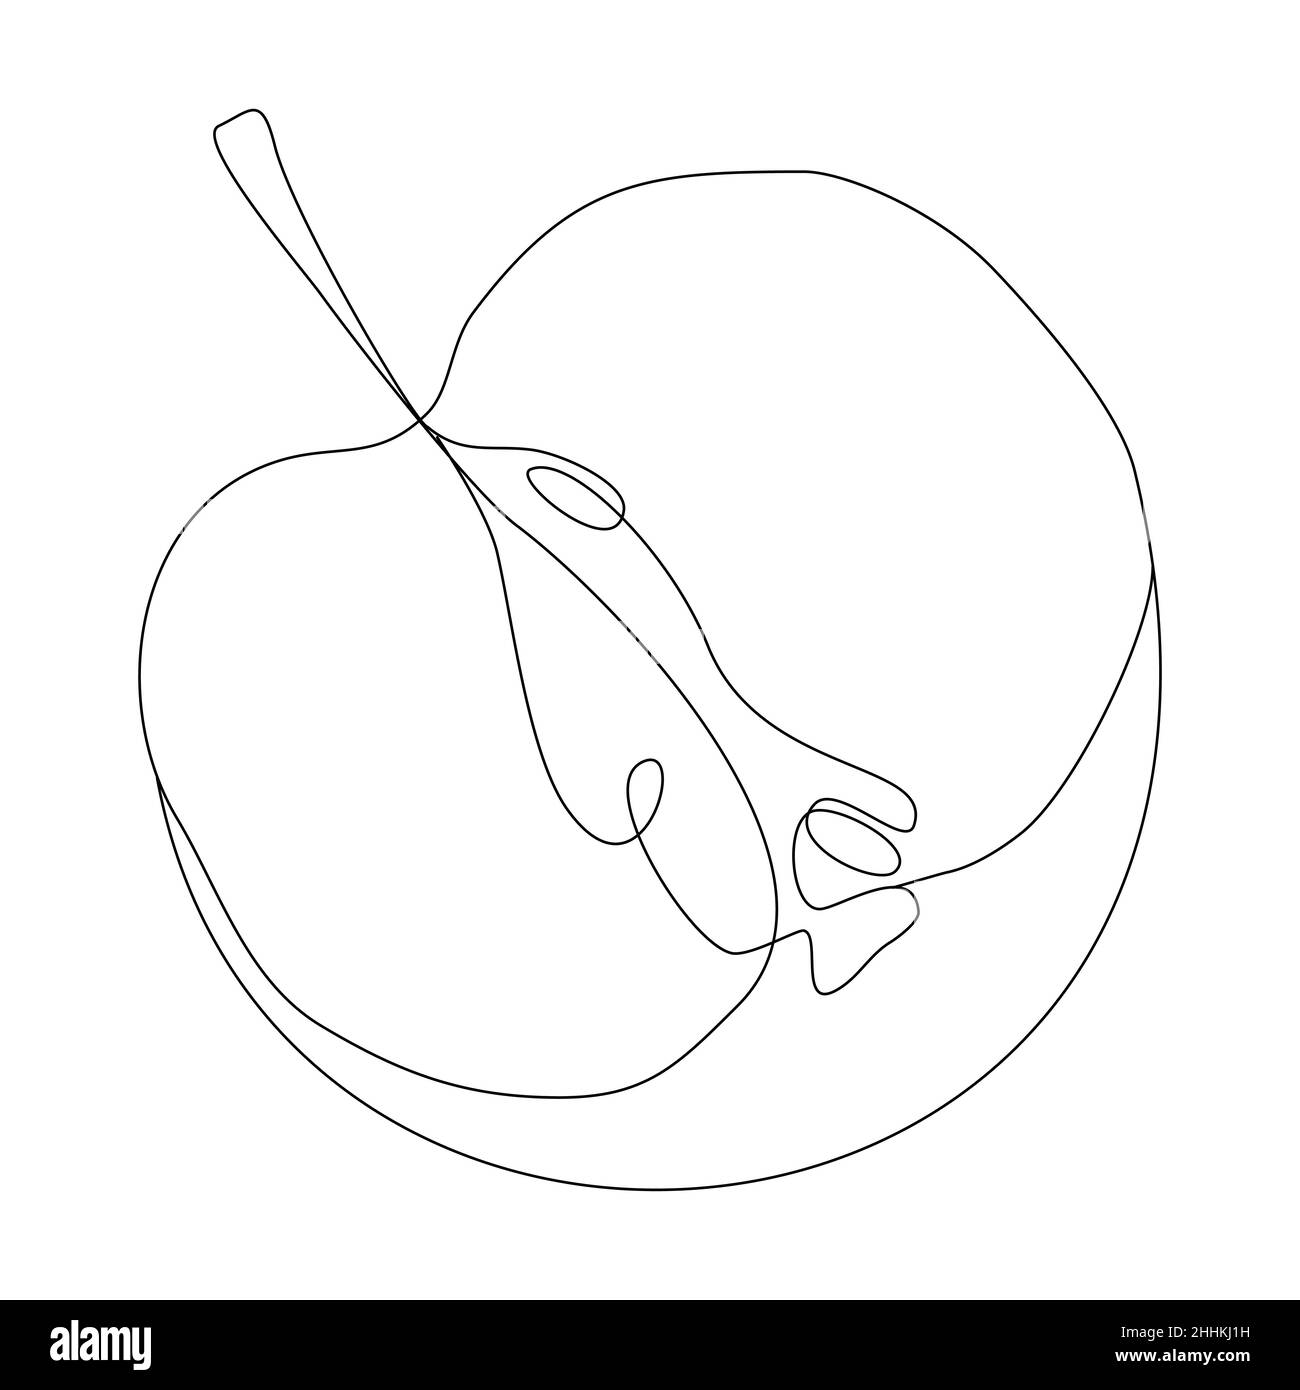 Apple silhouette in line art style. Cut apple half in simple outline. Minimalist vector continuous line drawn fruit Stock Vector